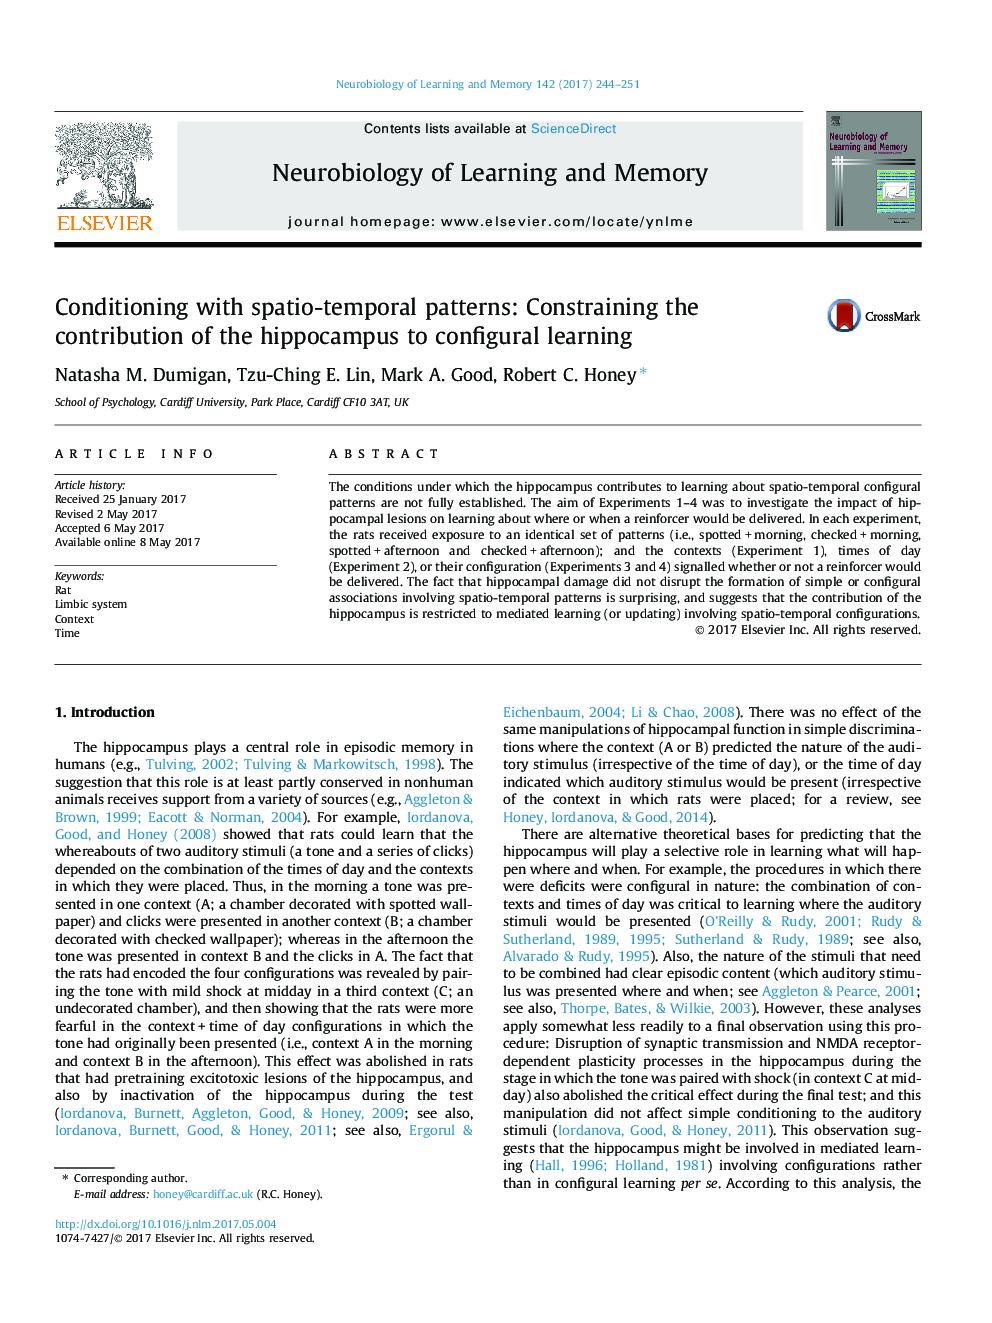 Conditioning with spatio-temporal patterns: Constraining the contribution of the hippocampus to configural learning